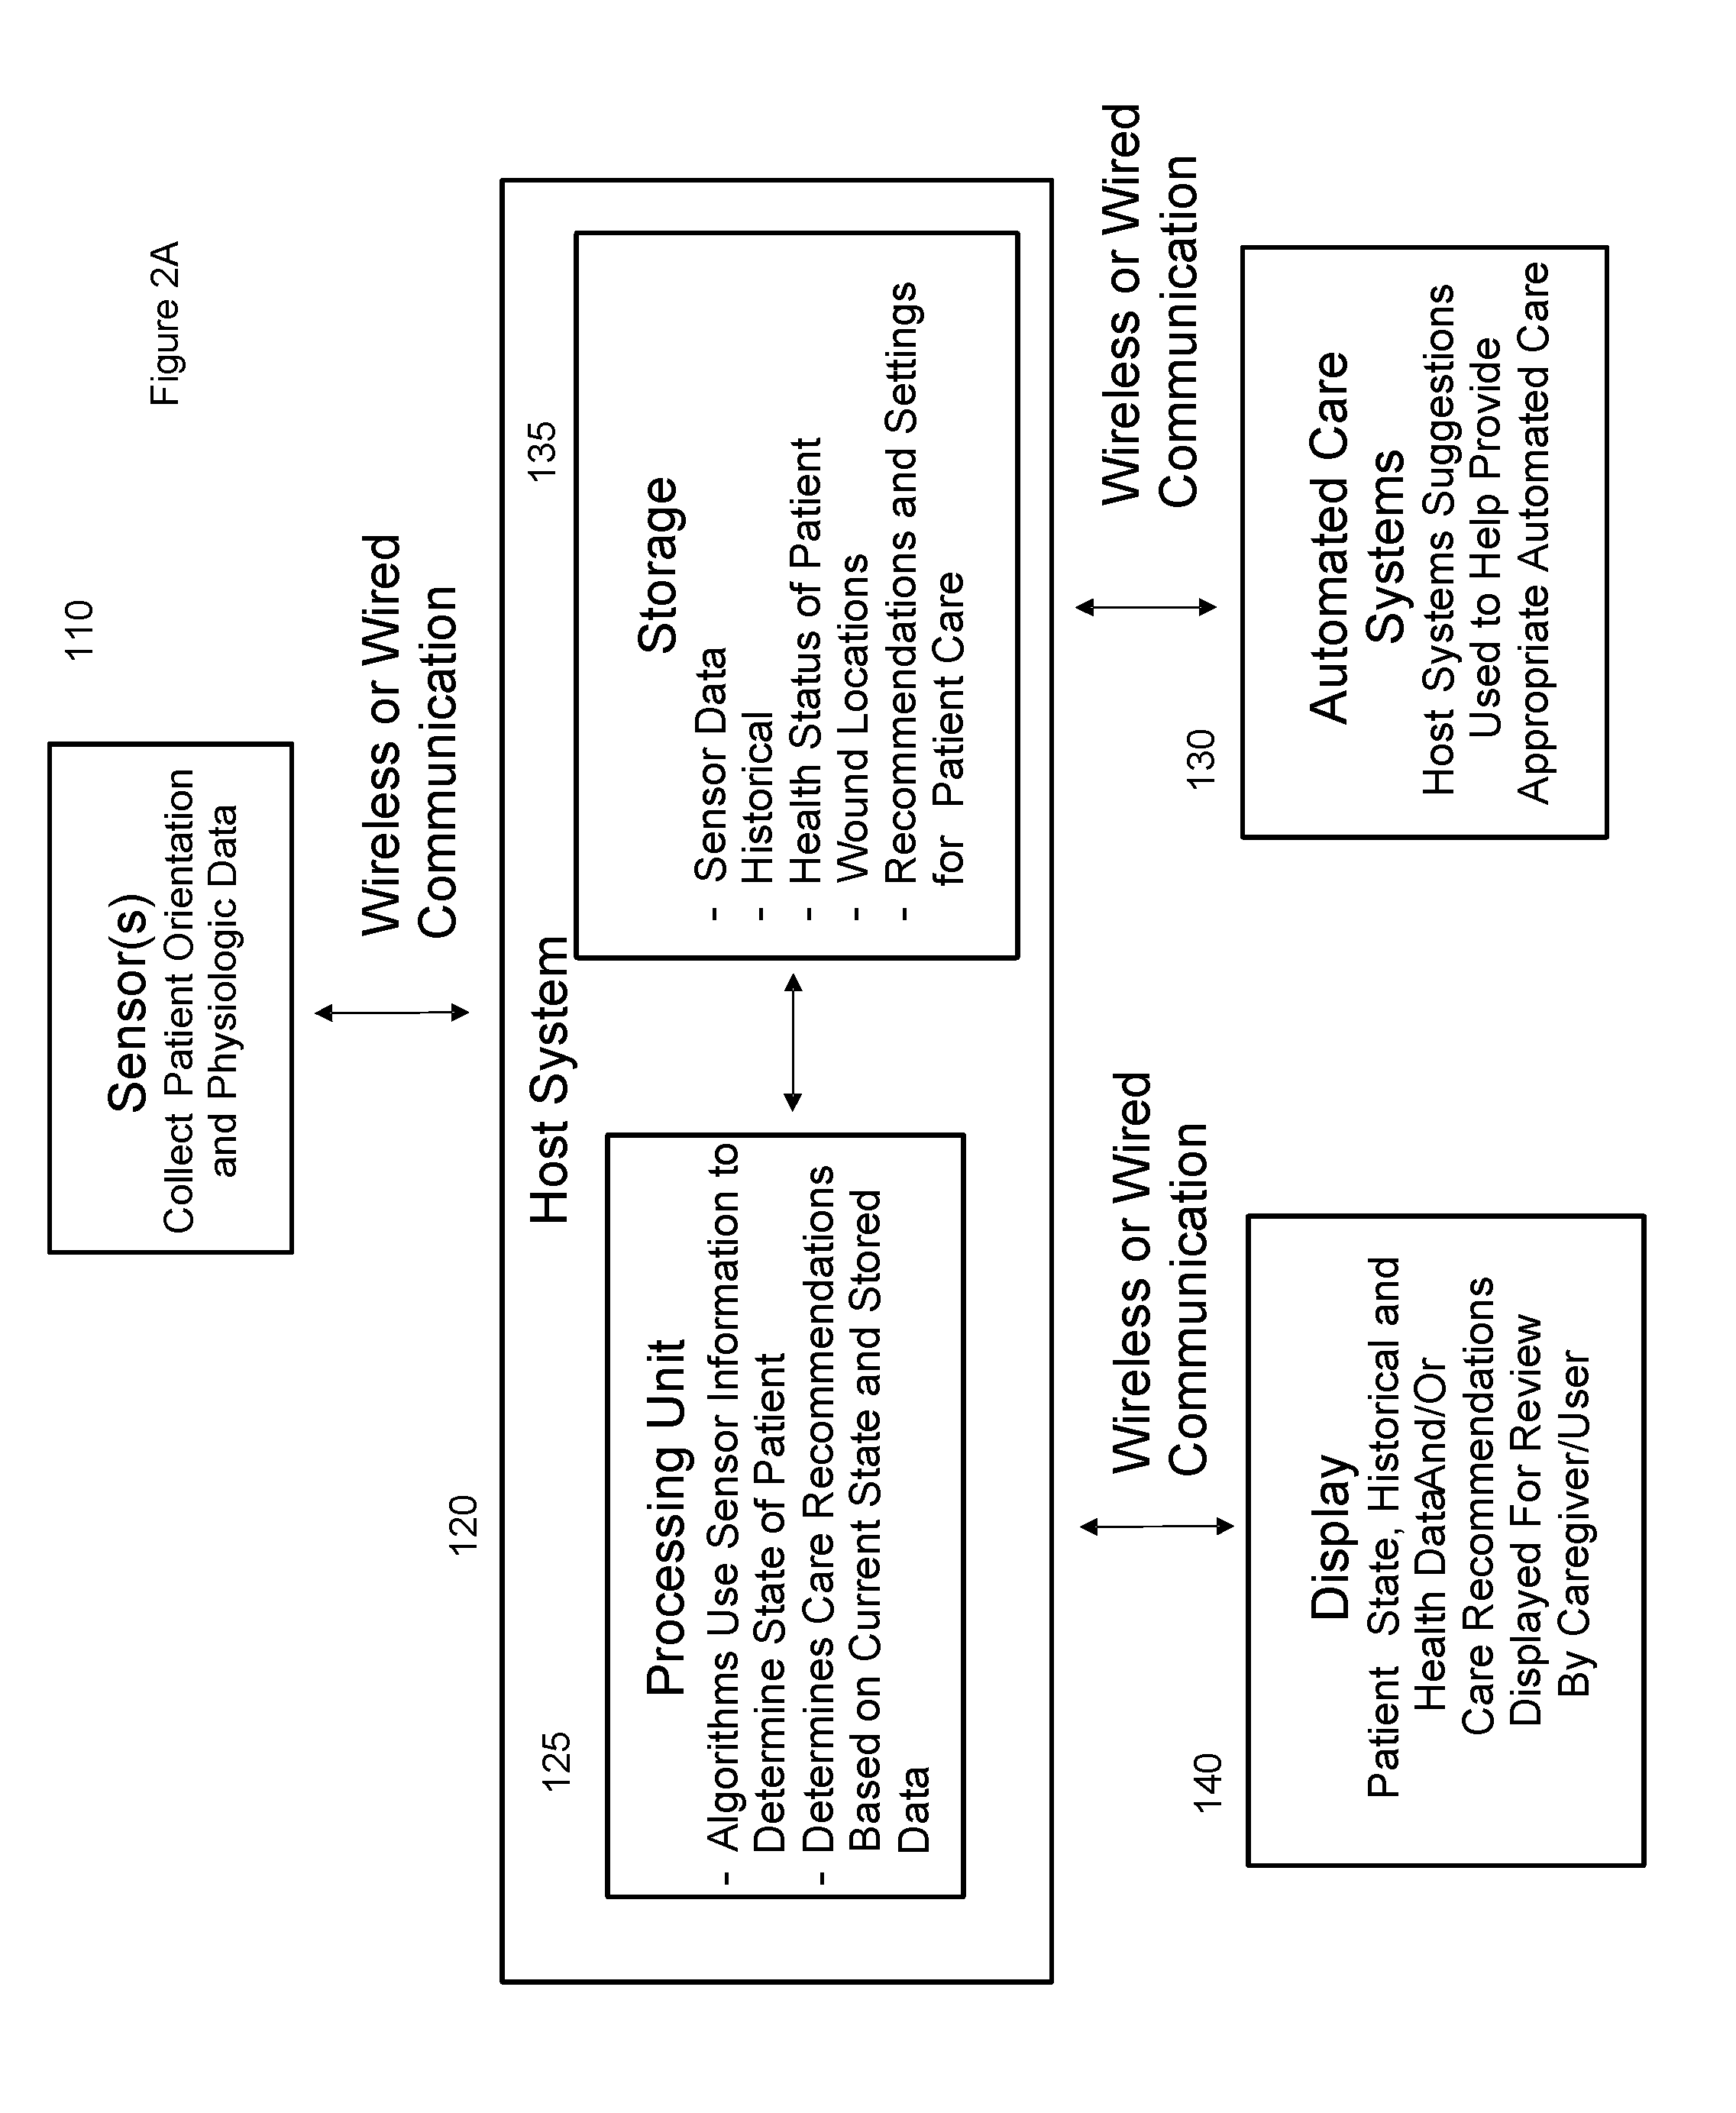 Calibrated Systems, Devices and Methods for Preventing, Detecting, and Treating Pressure-Induced Ischemia, Pressure Ulcers, and Other Conditions